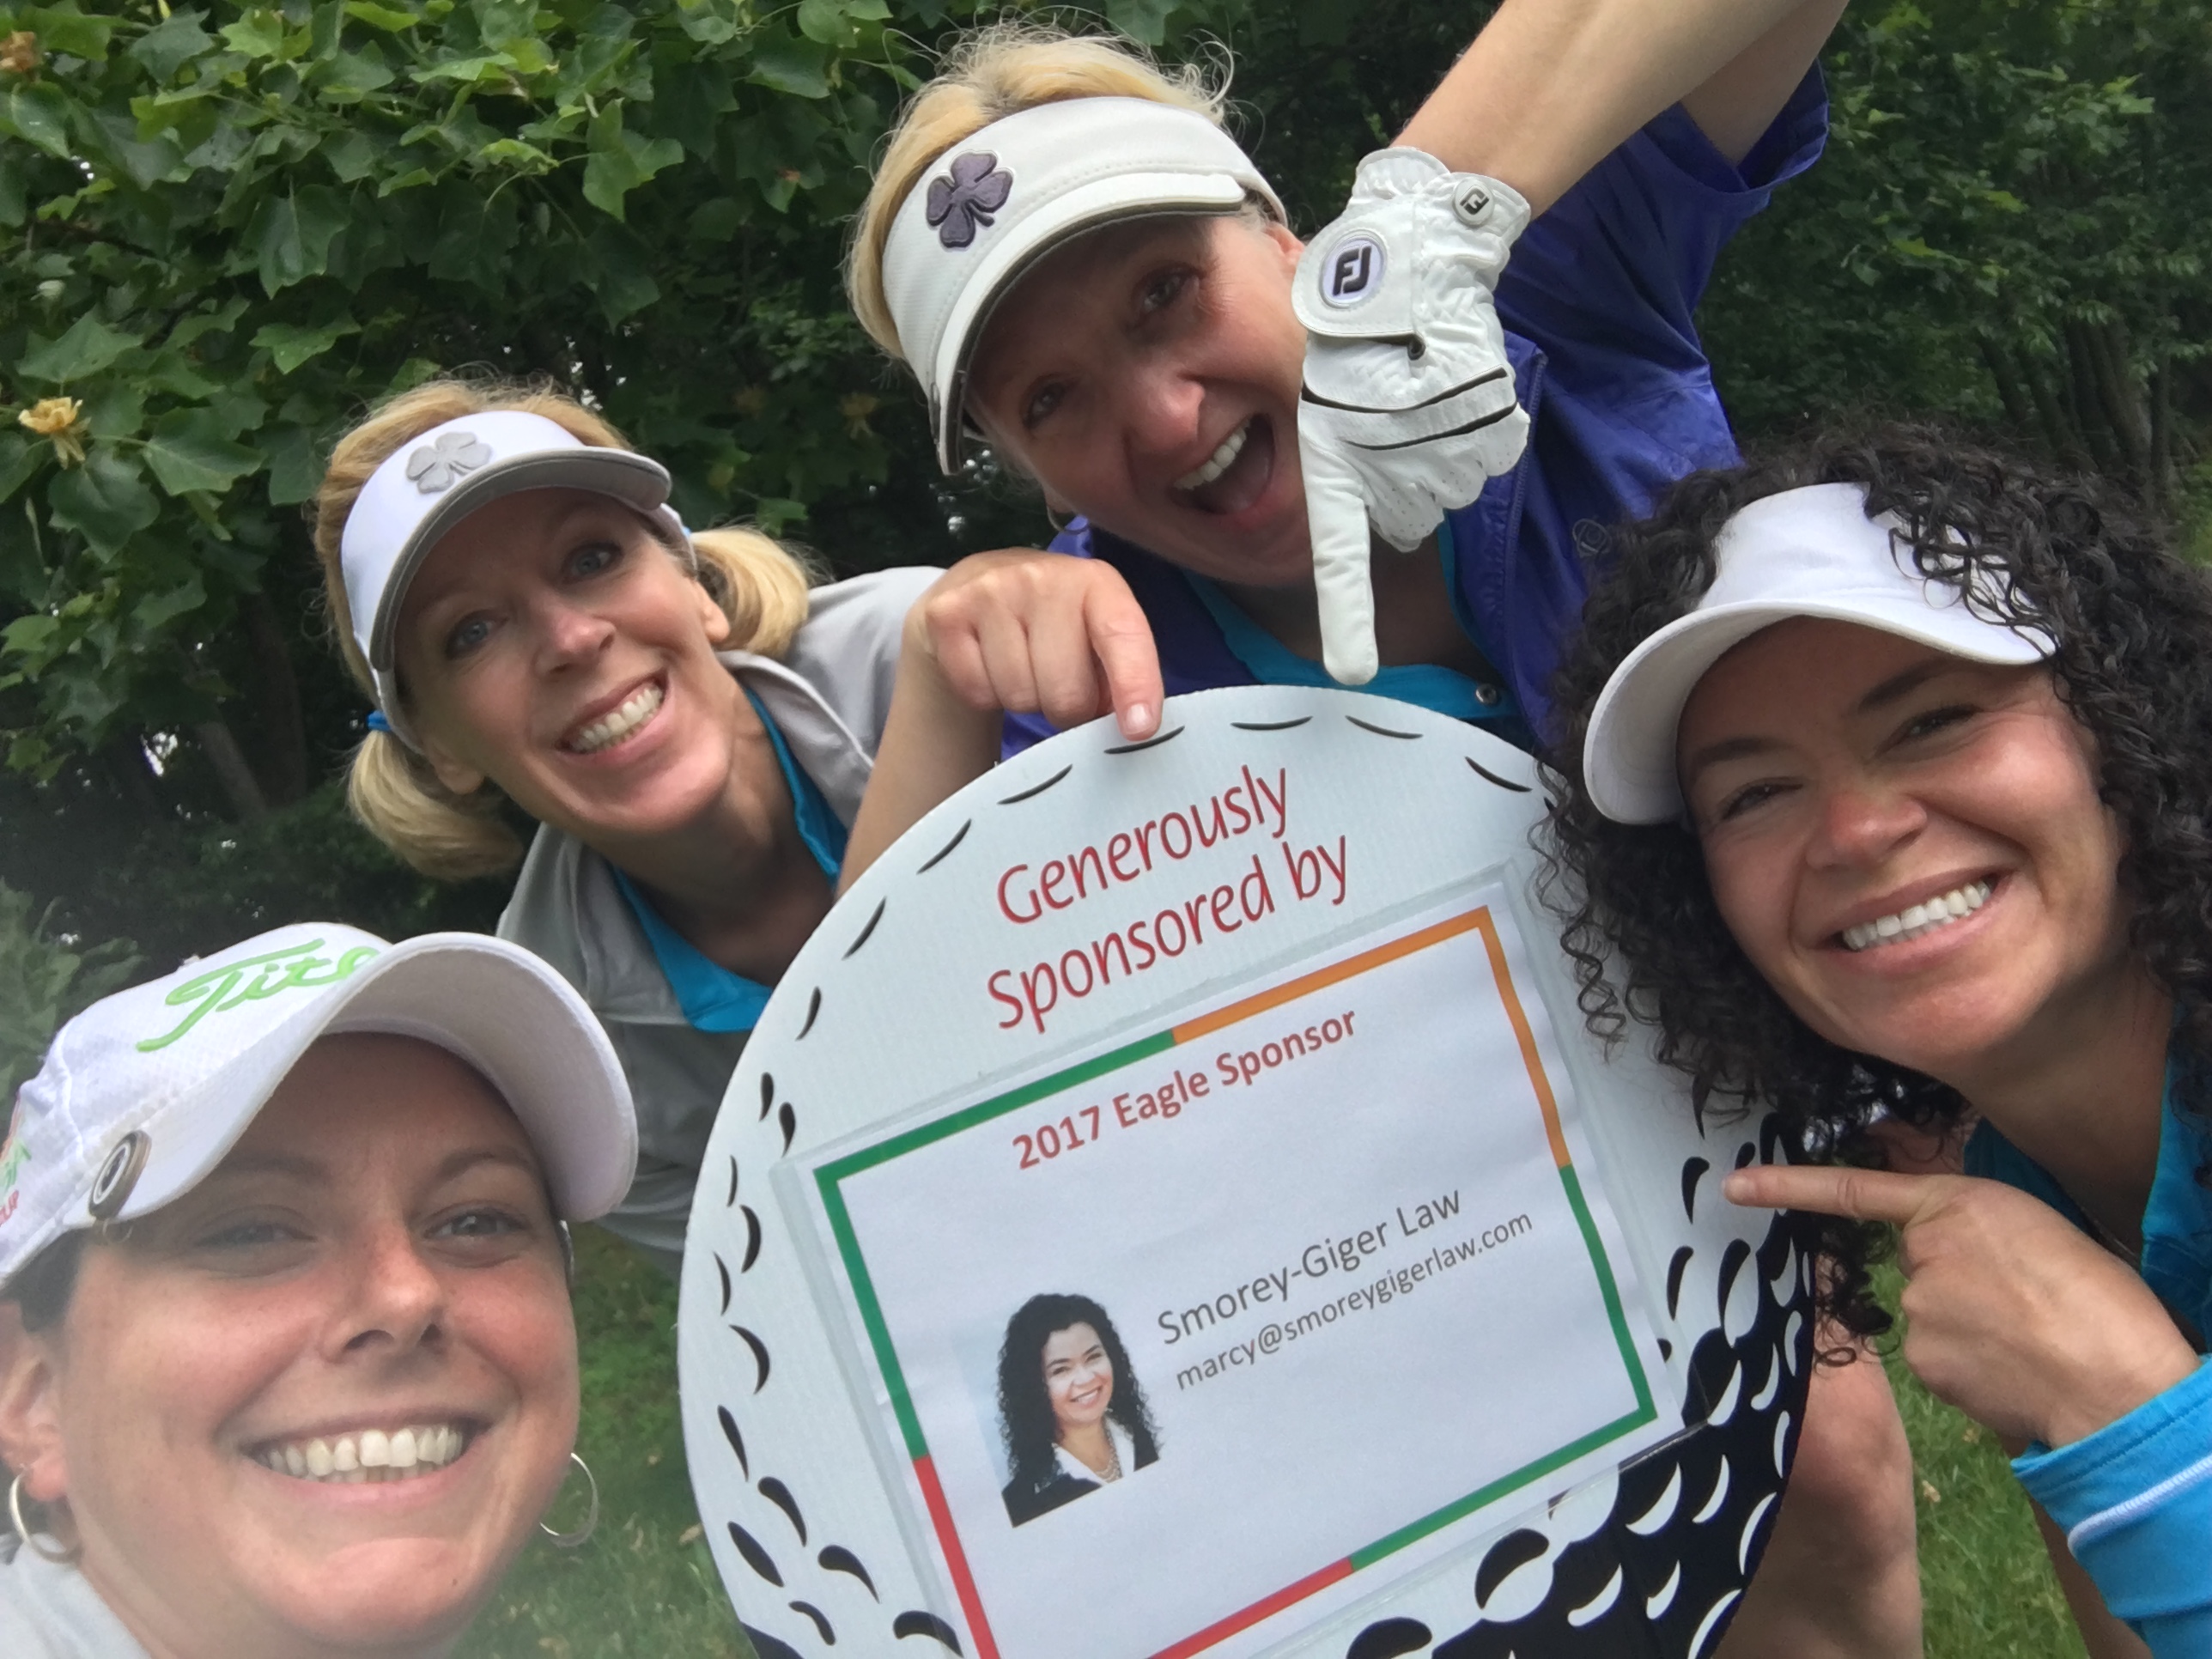 Smorey Giger Law sponsor for Executive Women’s Golf Association Pittsburgh - Chapter Championship